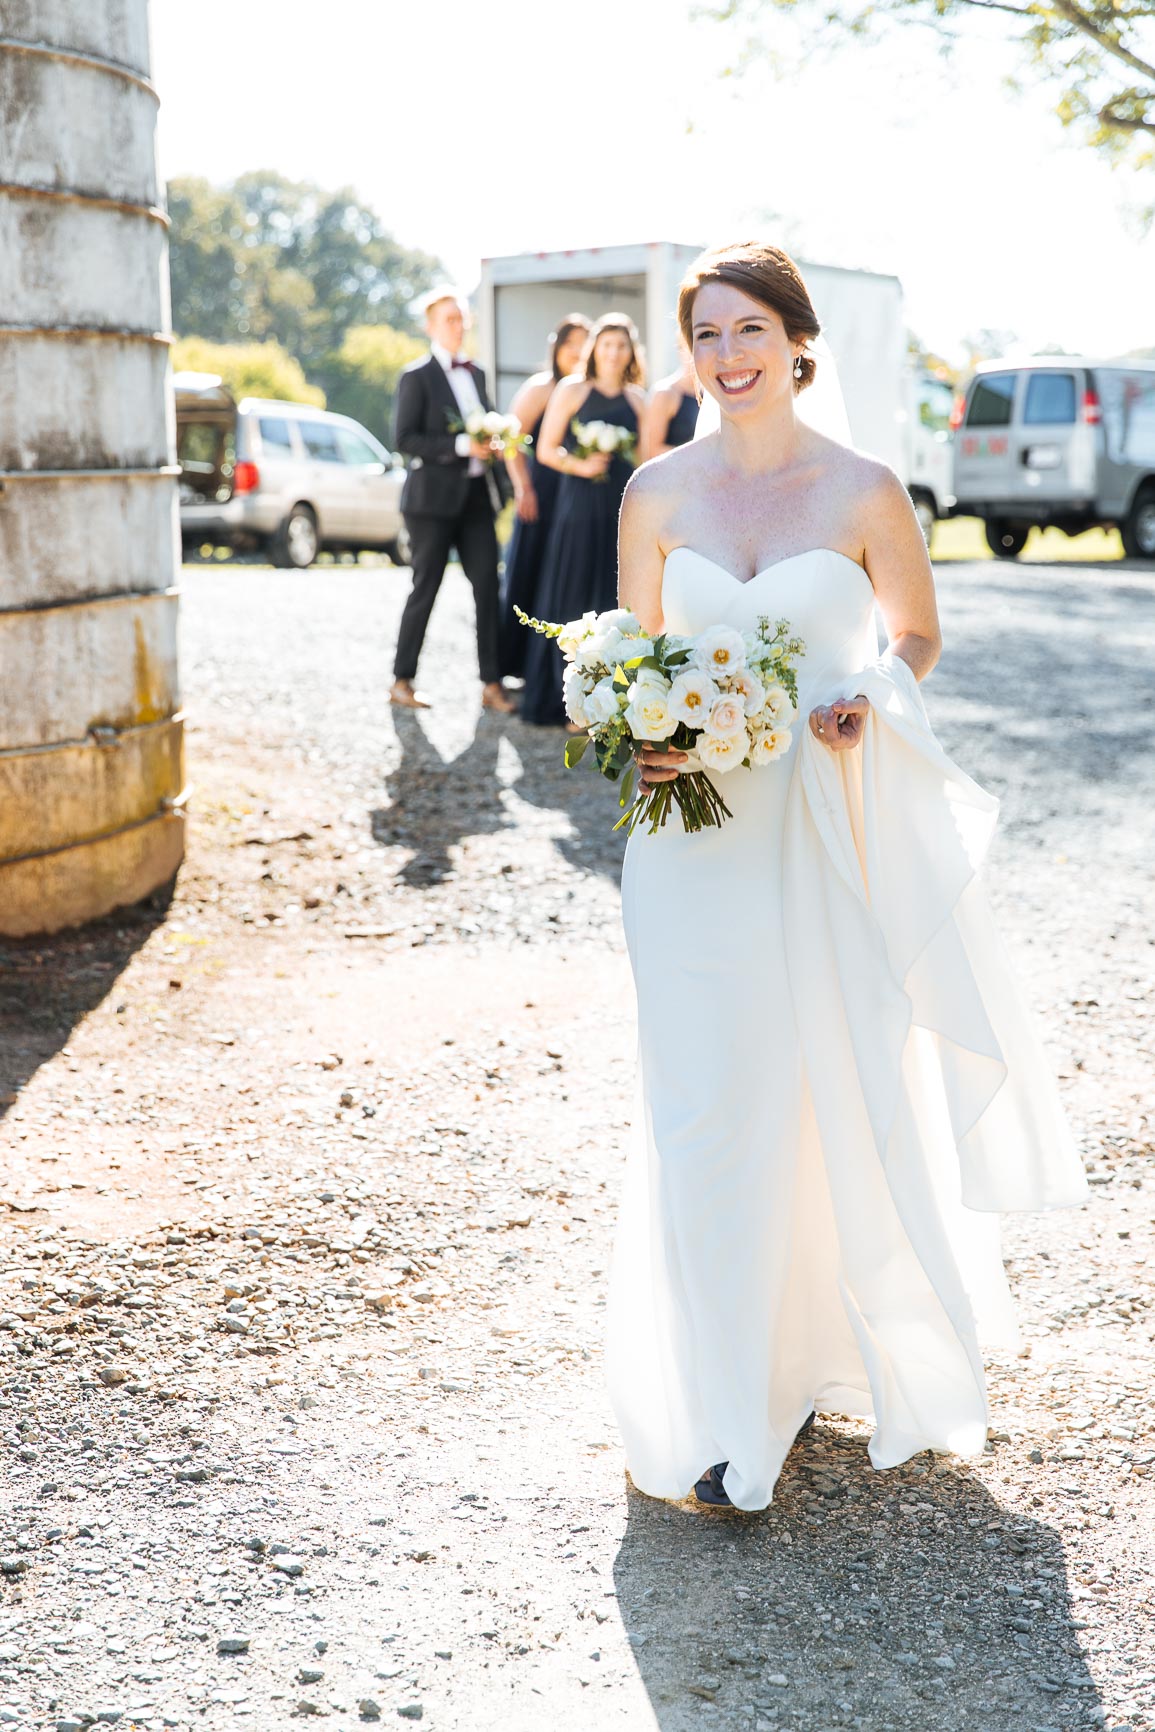 Wedding 1st look at The Dairy Barn in Fort Mill SC by Nhieu Tang photography | nhieutang.com